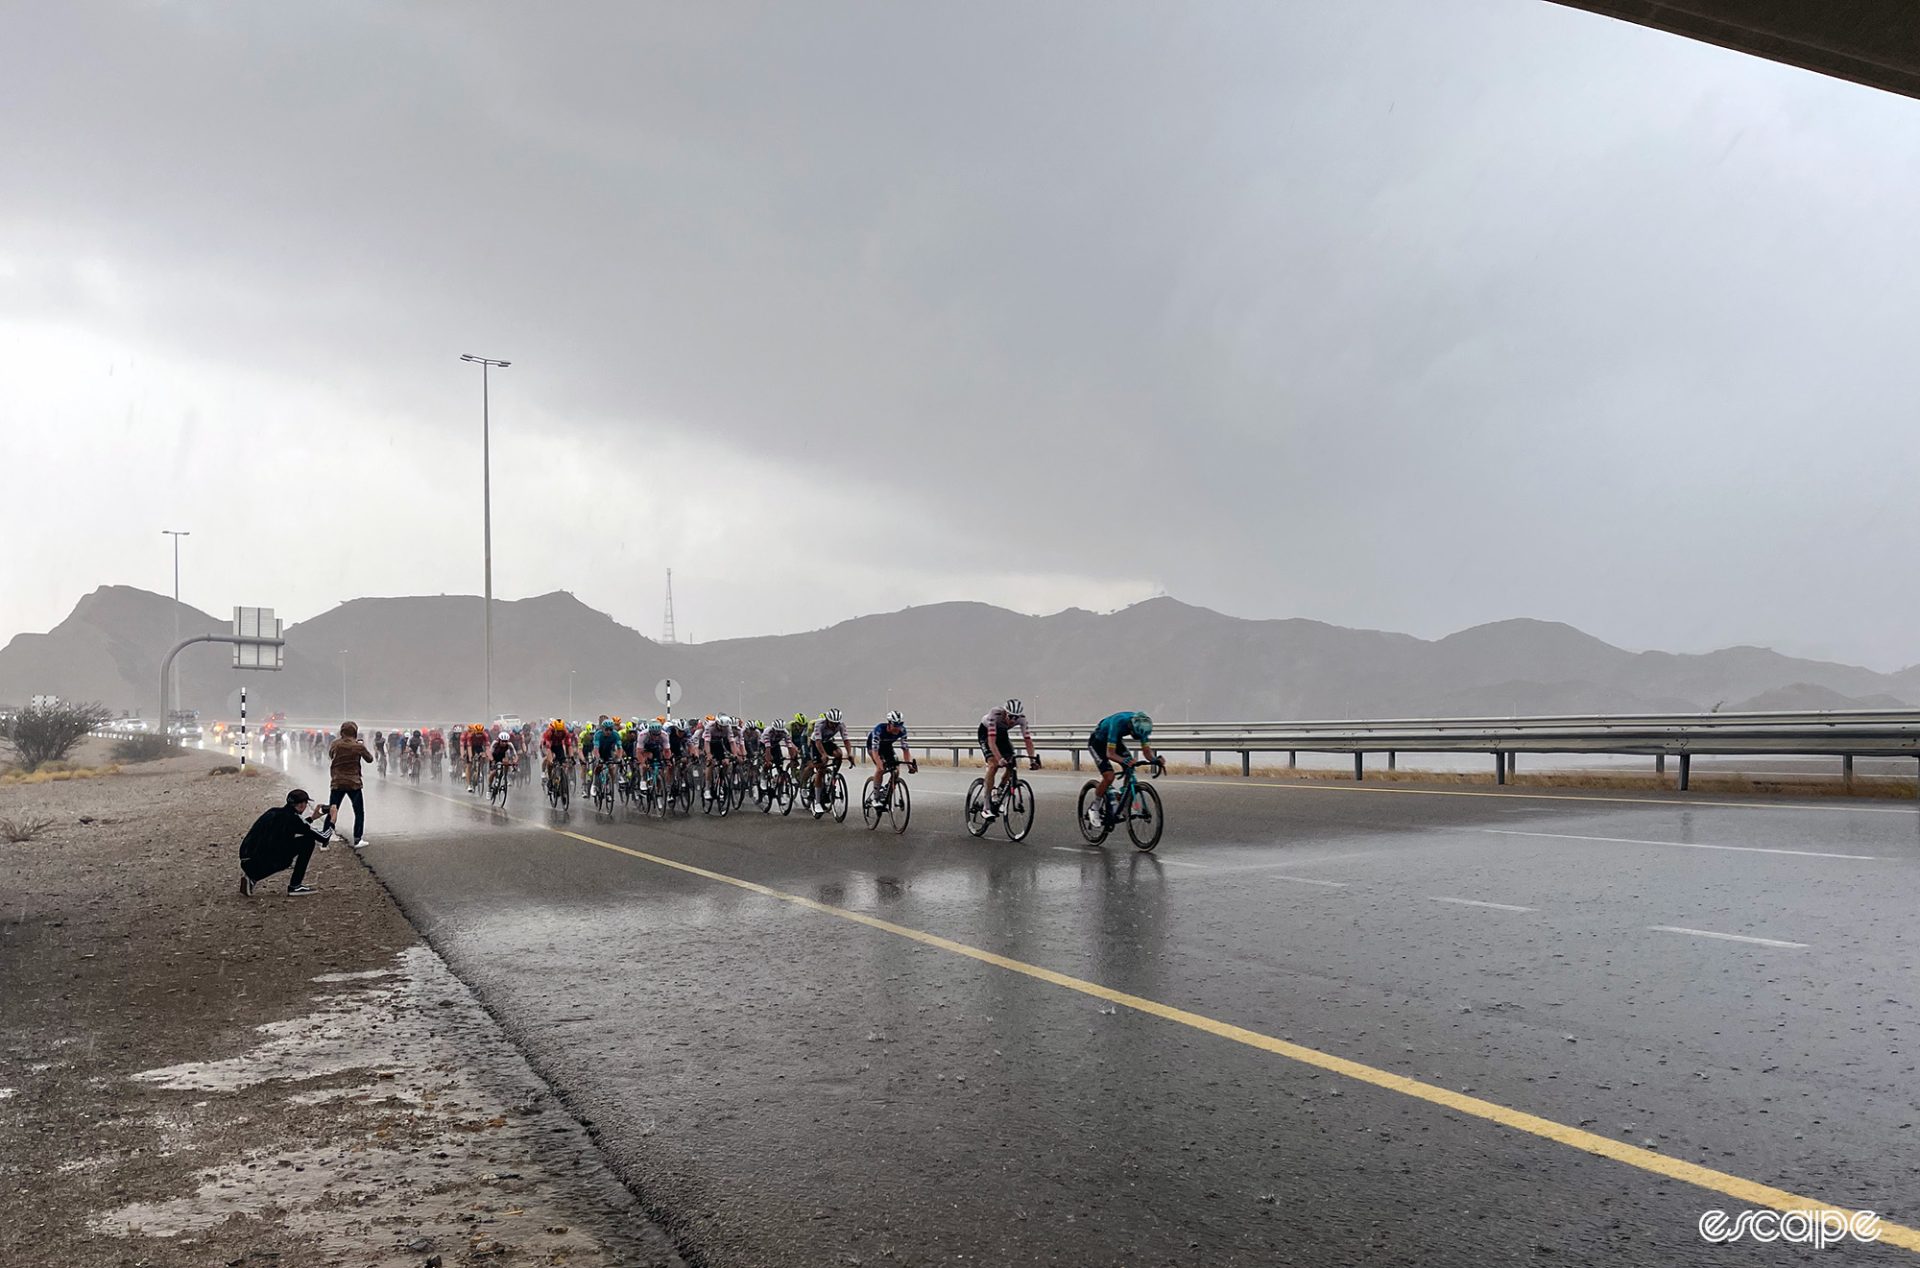 The rain pours on the riders at the Tour of Oman.